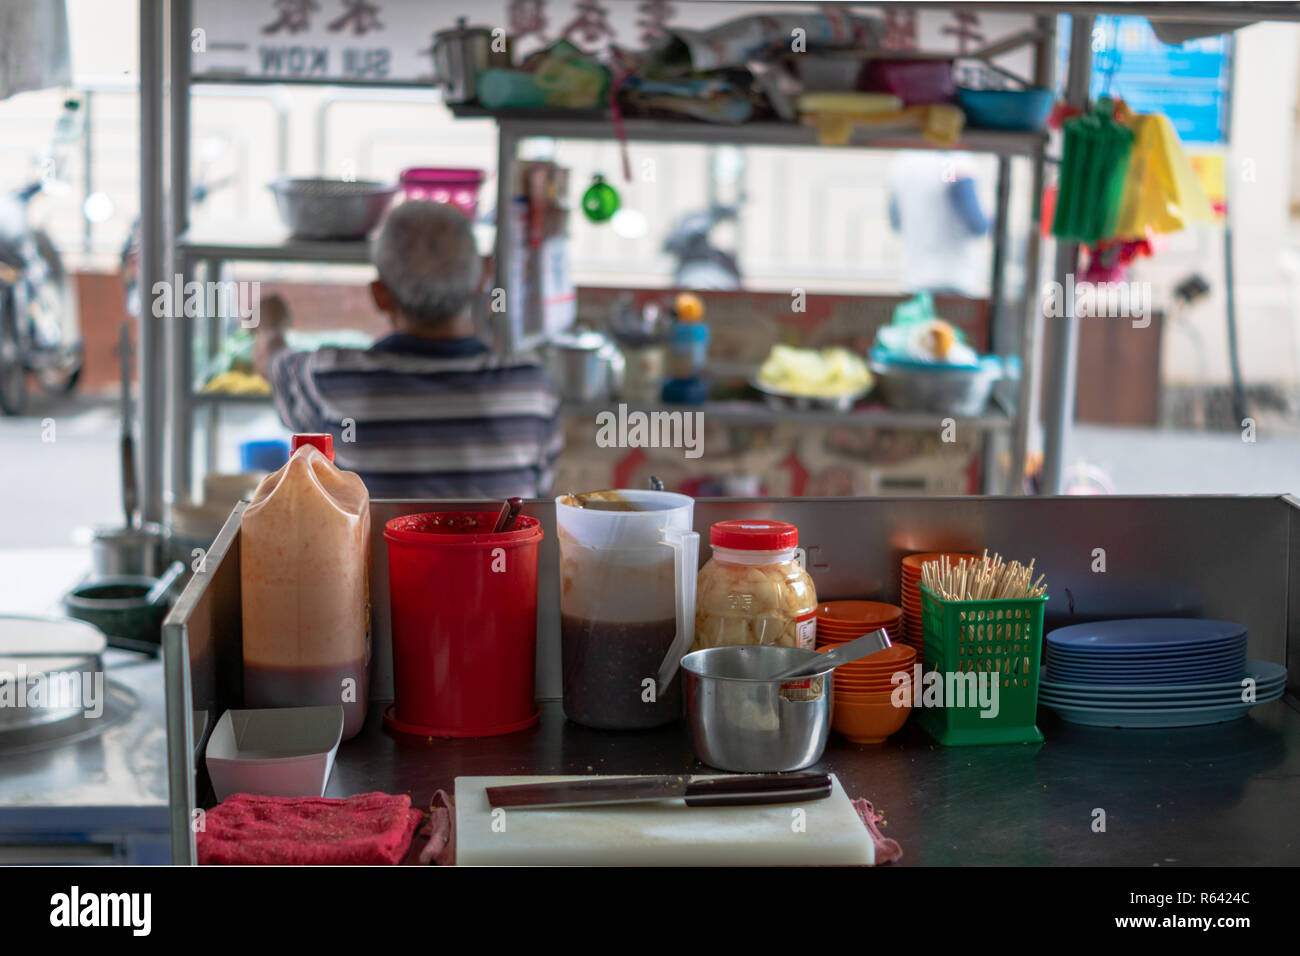 Penang, Malaysia - December 2016: Street food restaurant kitchen in Georgetown, Penang, Malaysia. Georgetown is famous for its street food culture. Stock Photo